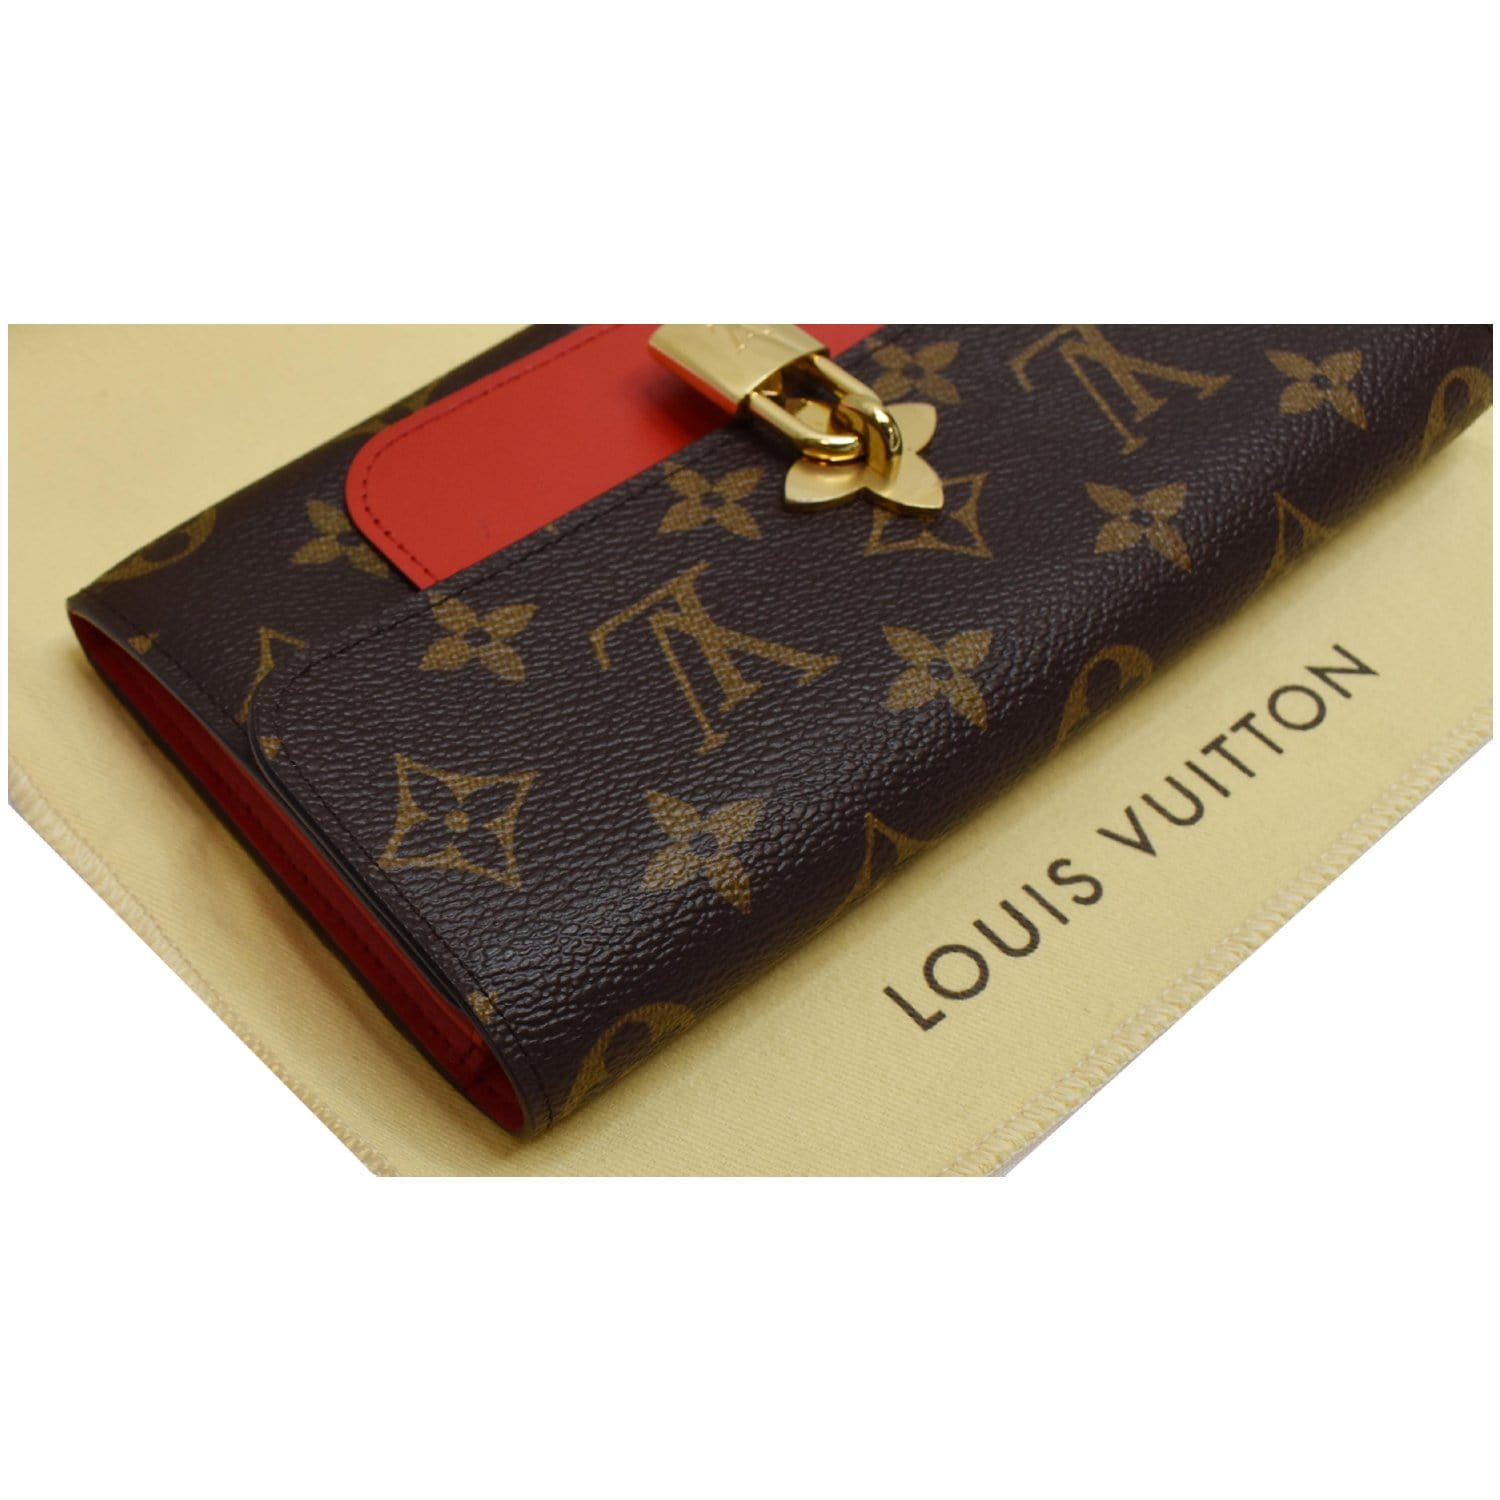 lv wallet with lock